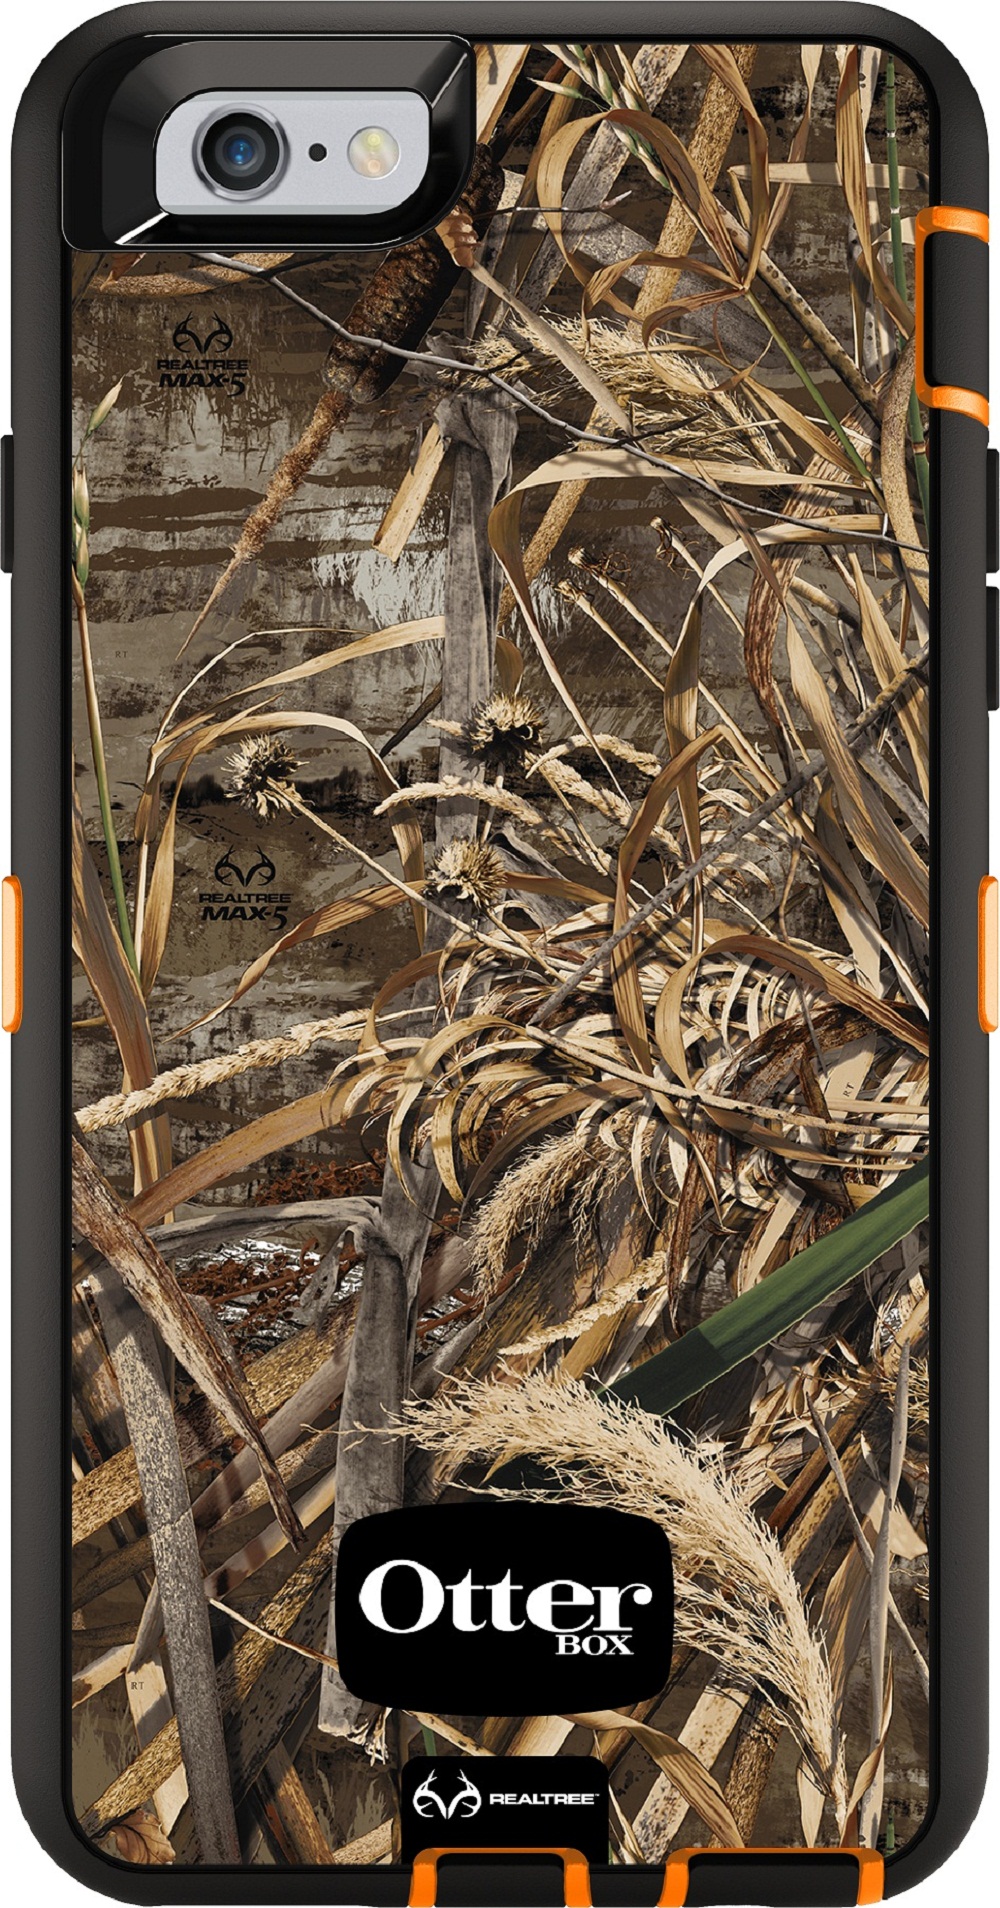 Otterbox Defender Series iPhone 6 Realtree Camo Cases Realtree